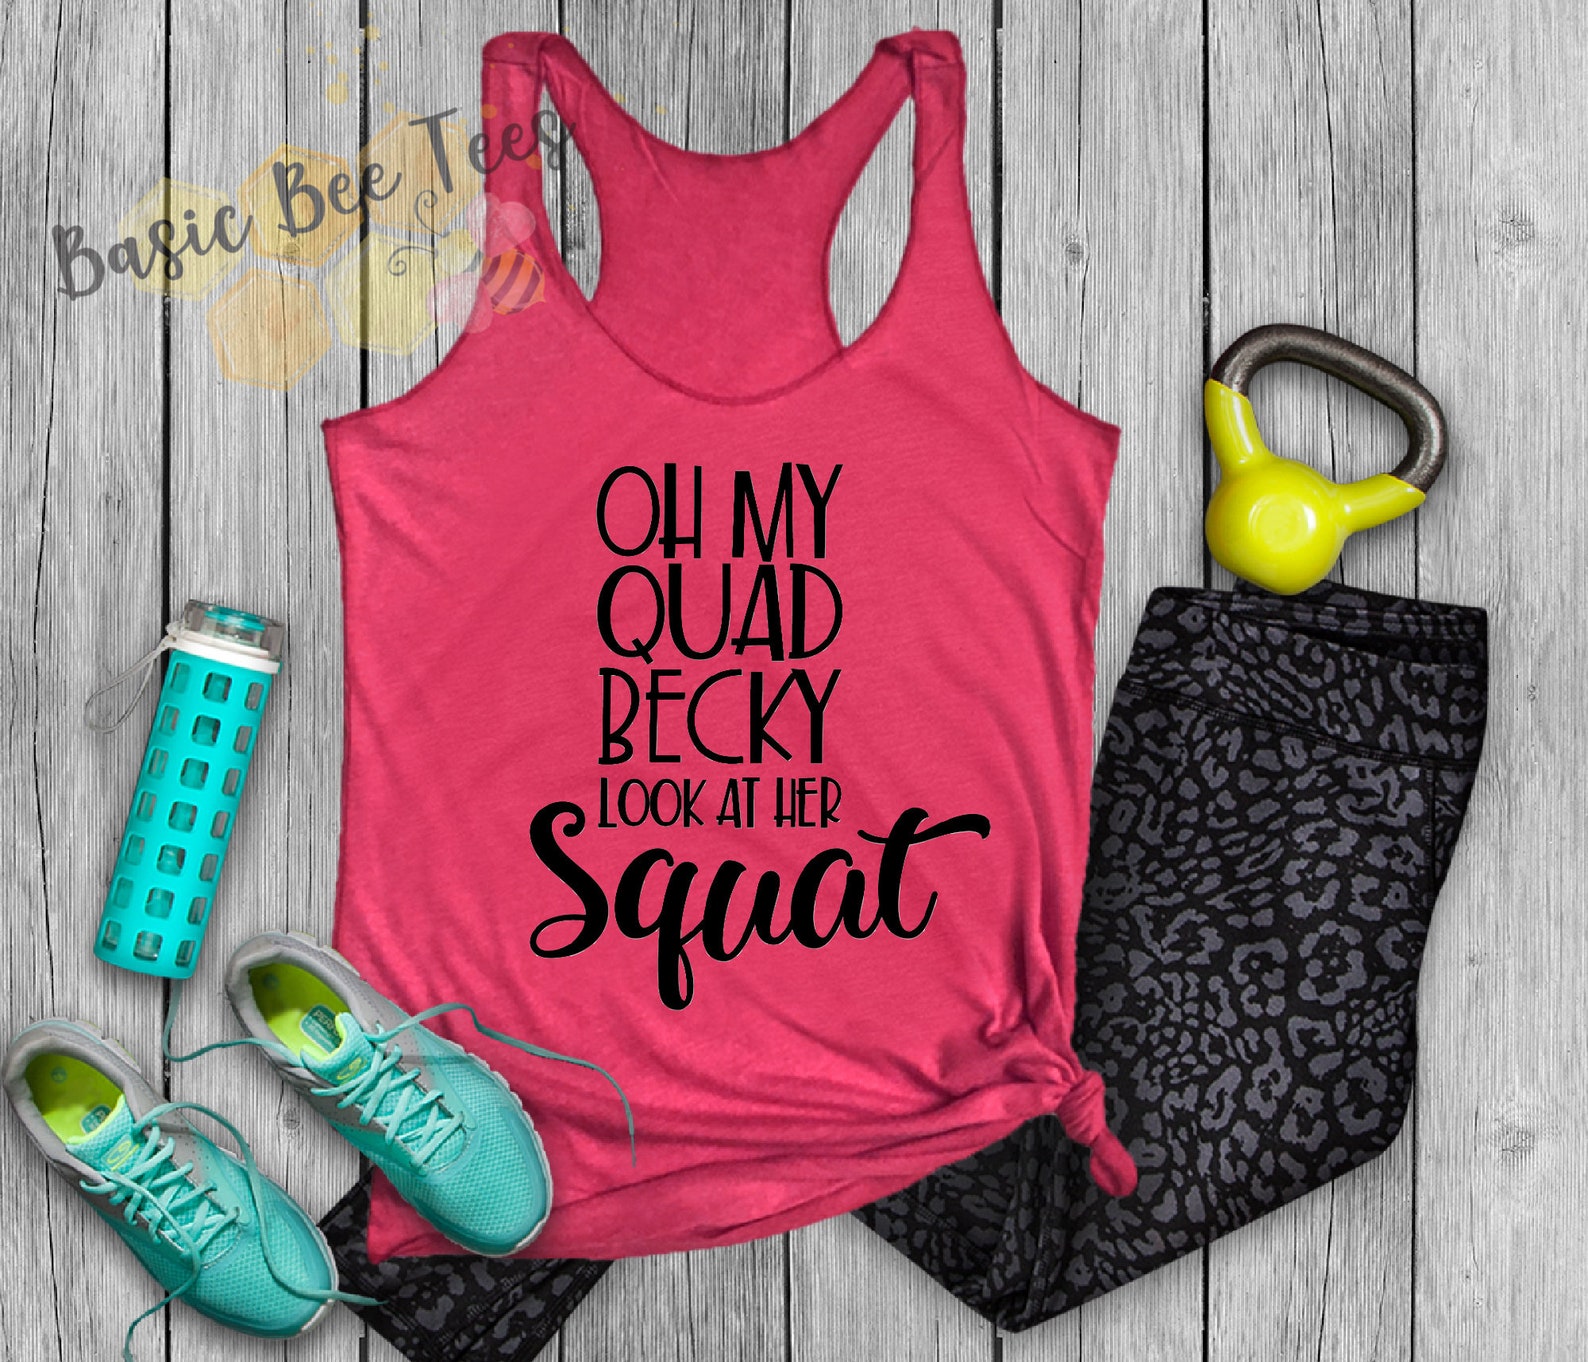 Oh My Quad Becky Look at Her Squat Funny Workout Tank | Etsy